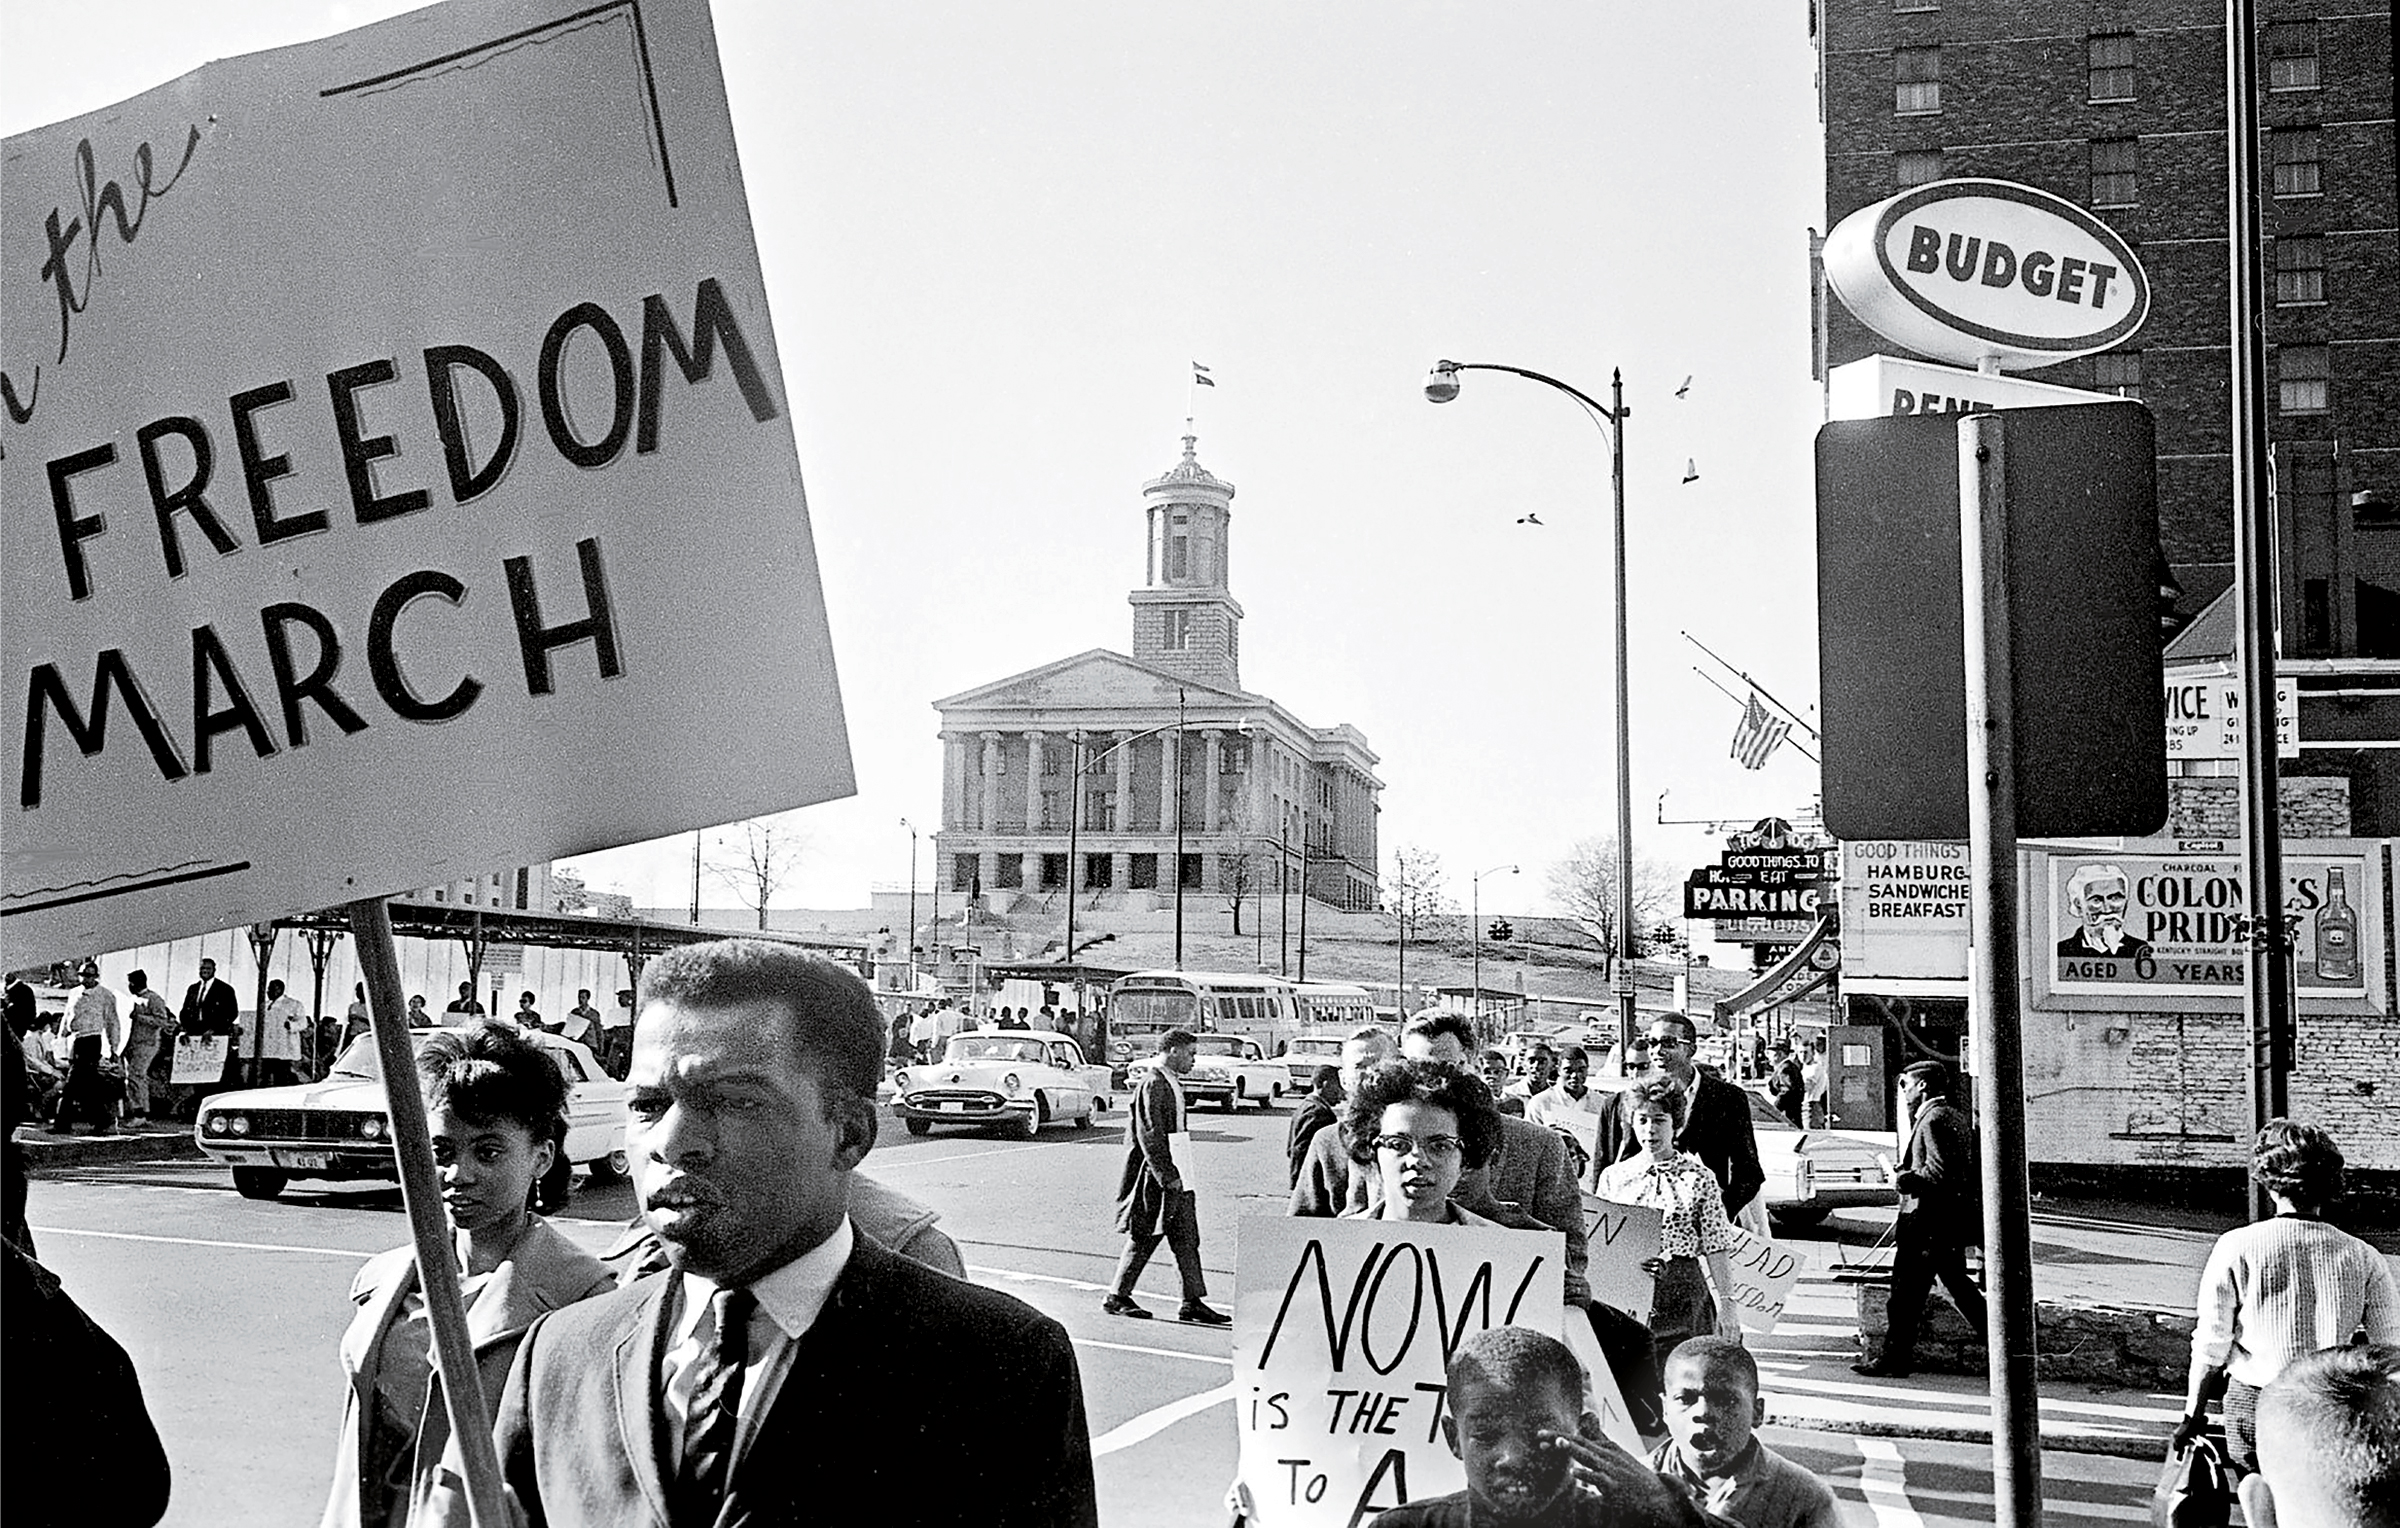 John Lewis, in the foreground holding a sign, demonstrates in downtown Nashville on March 23, 1963. (Frank Empson—The Tennessean/USA Today Network)